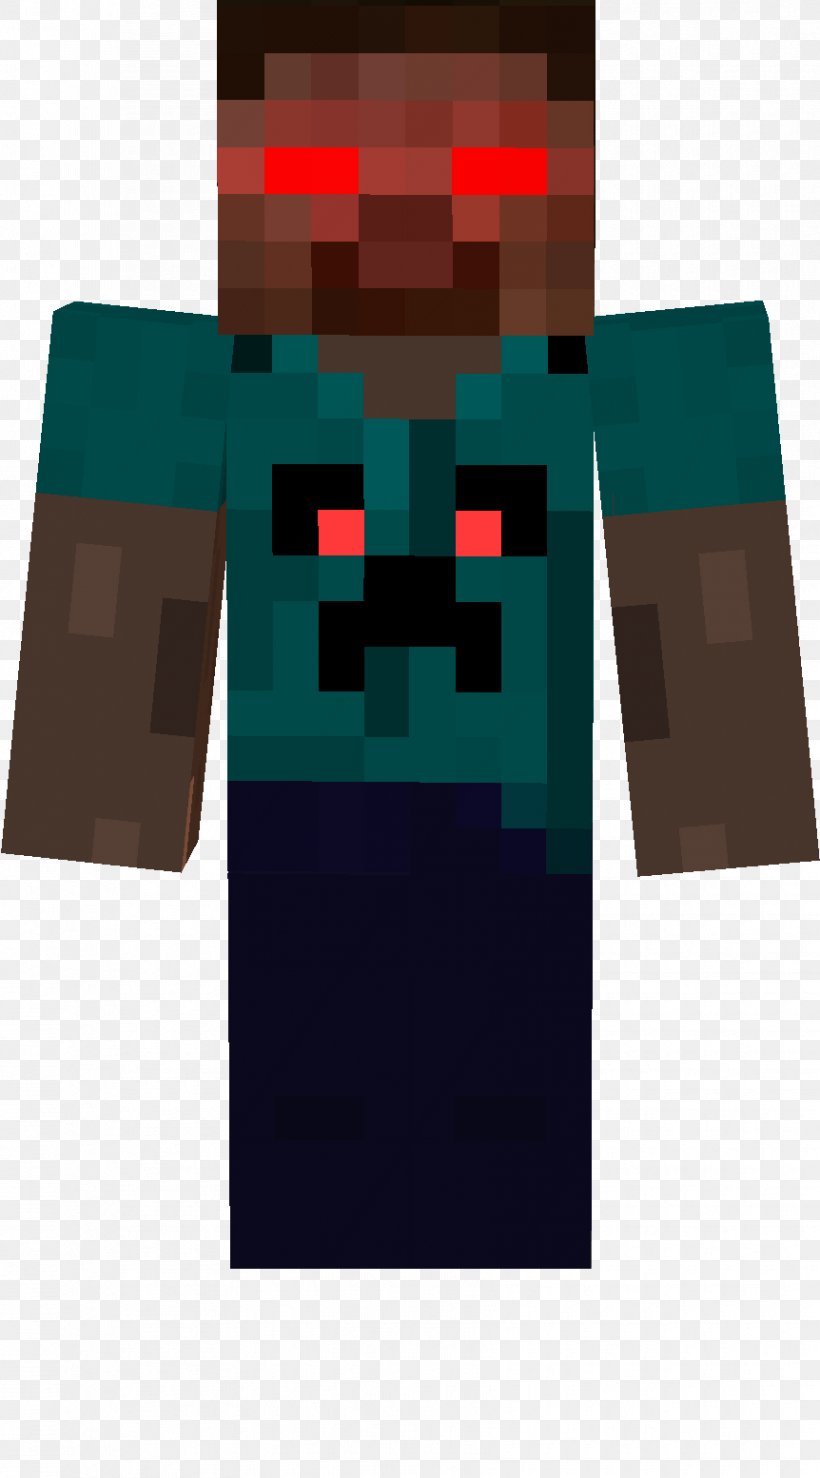 how to get free minecraft skins